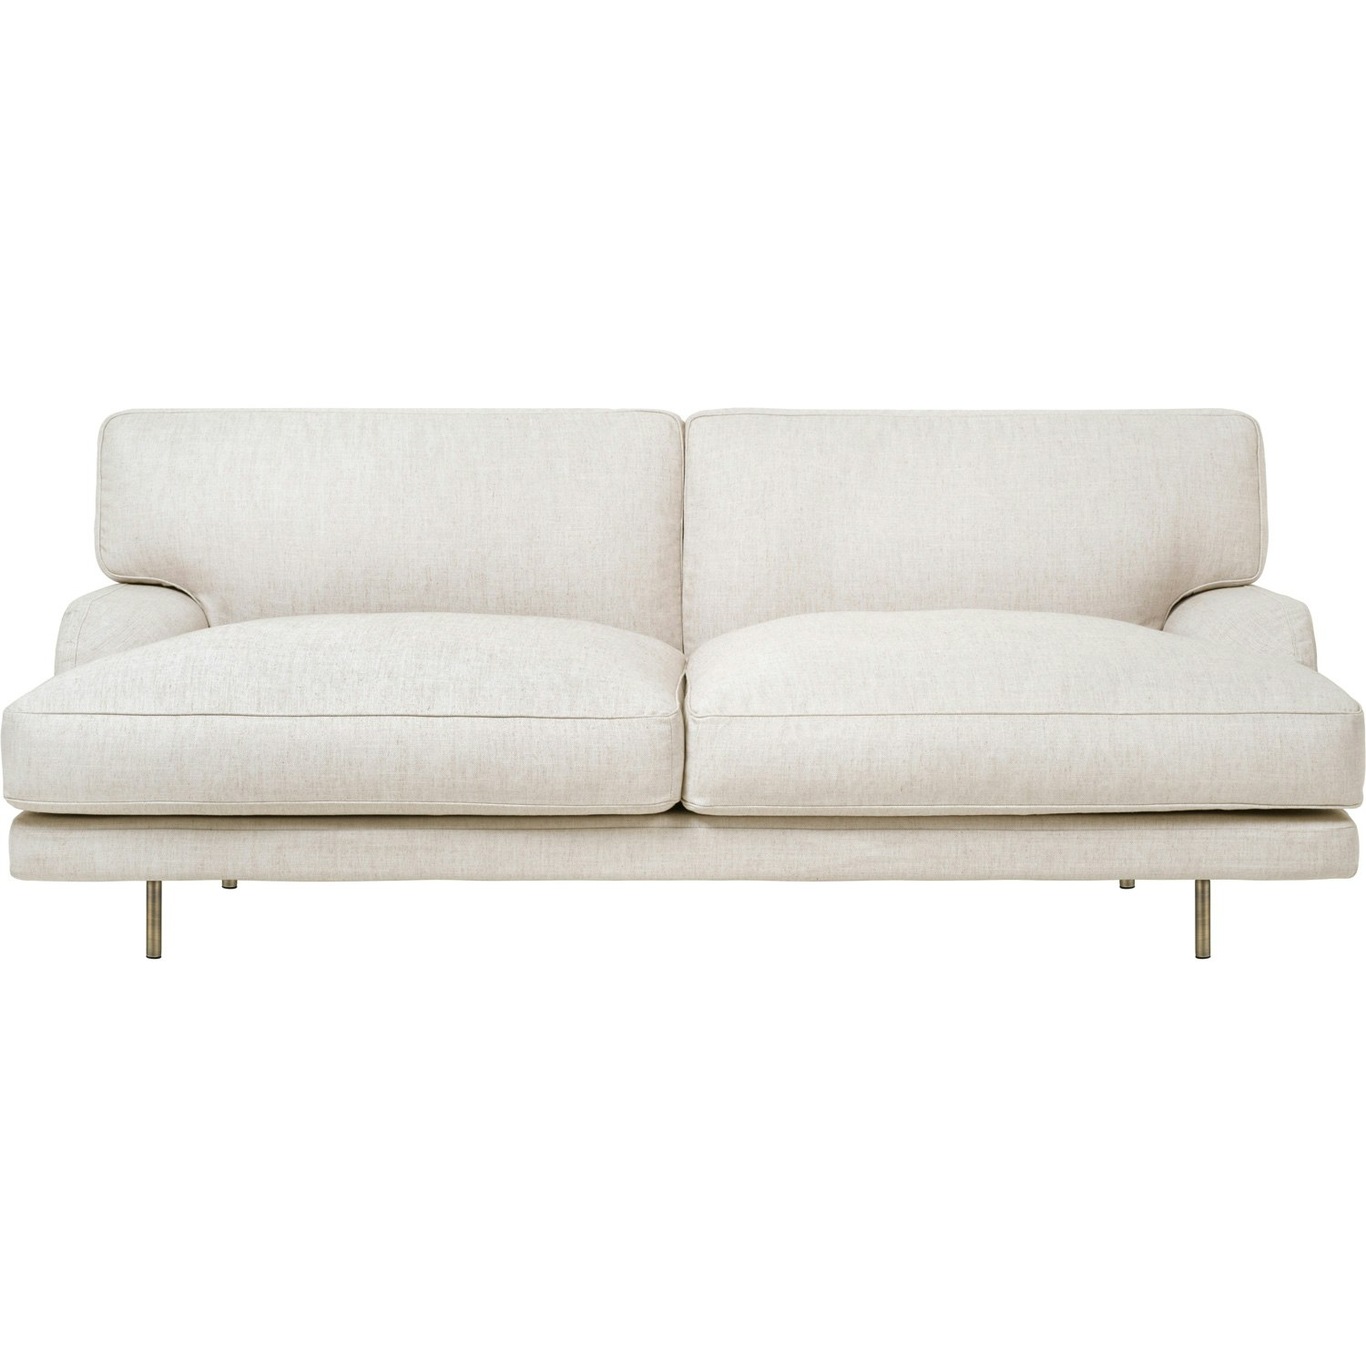 Flaneur Sofa FC 2,5-Seater, Legs Brass / Hot Madison 419 Off White